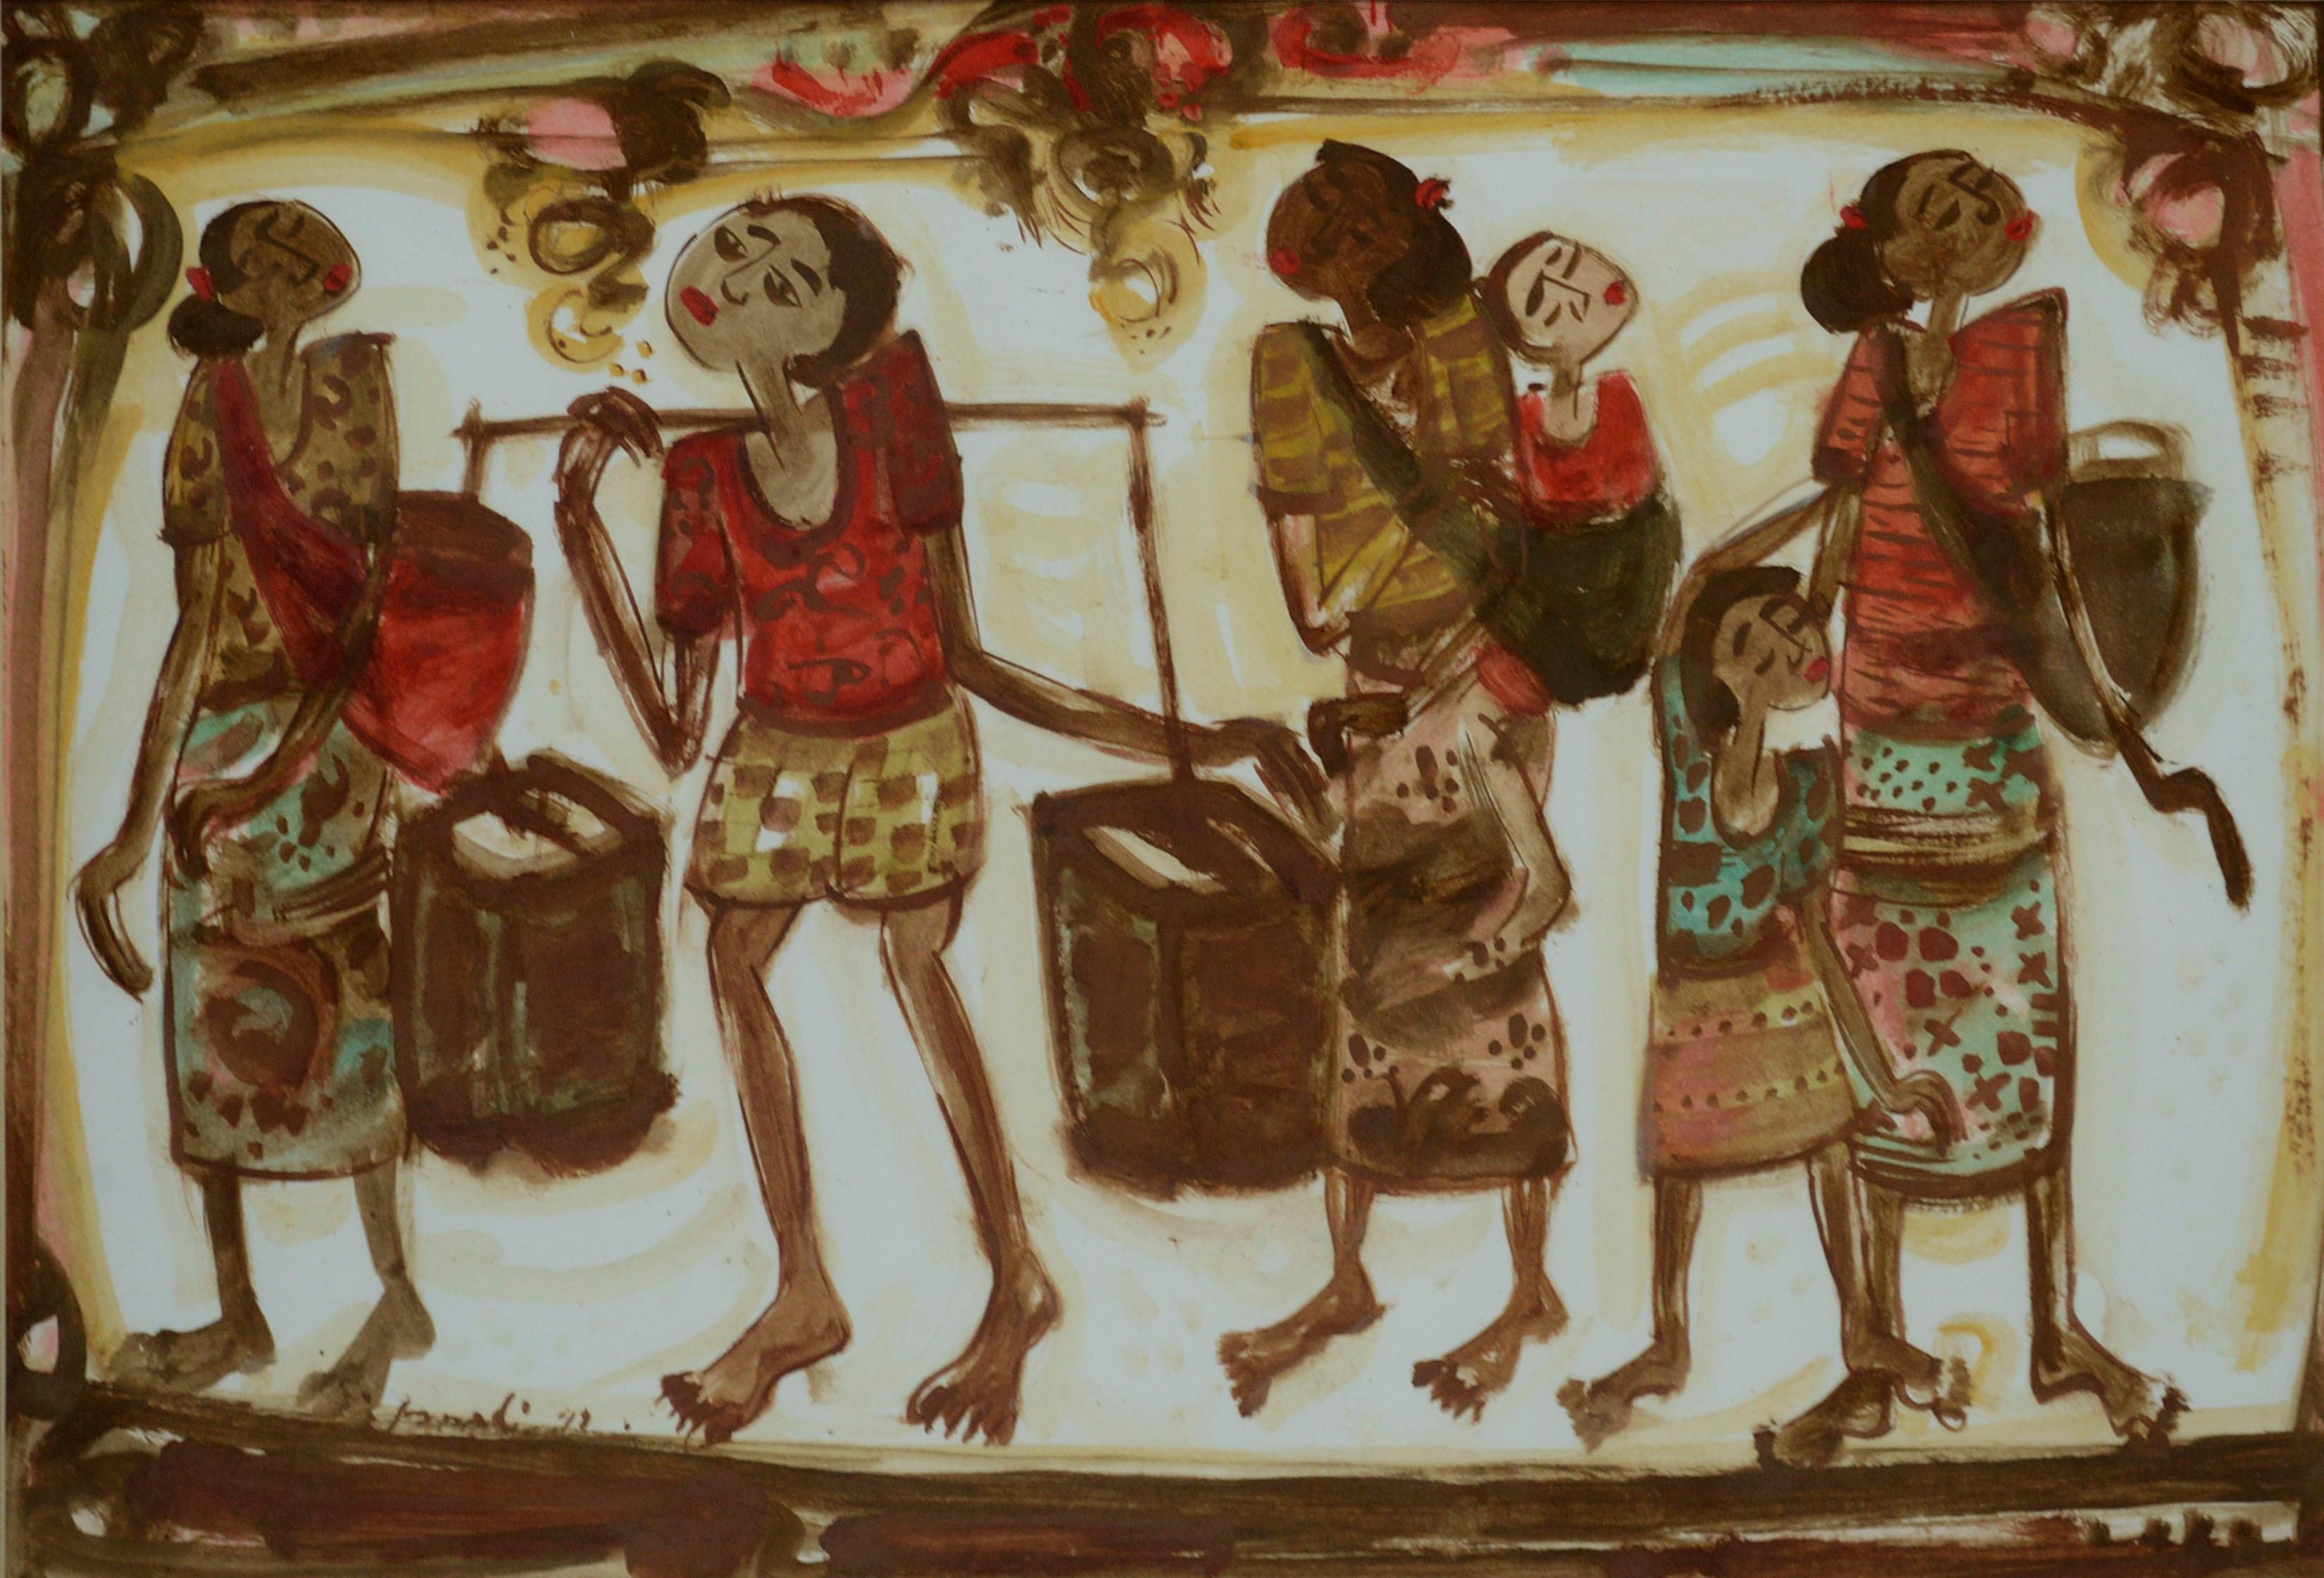 Women Carrying Baskets with Children, Figurative Gouache on Paper  - Art by Unknown